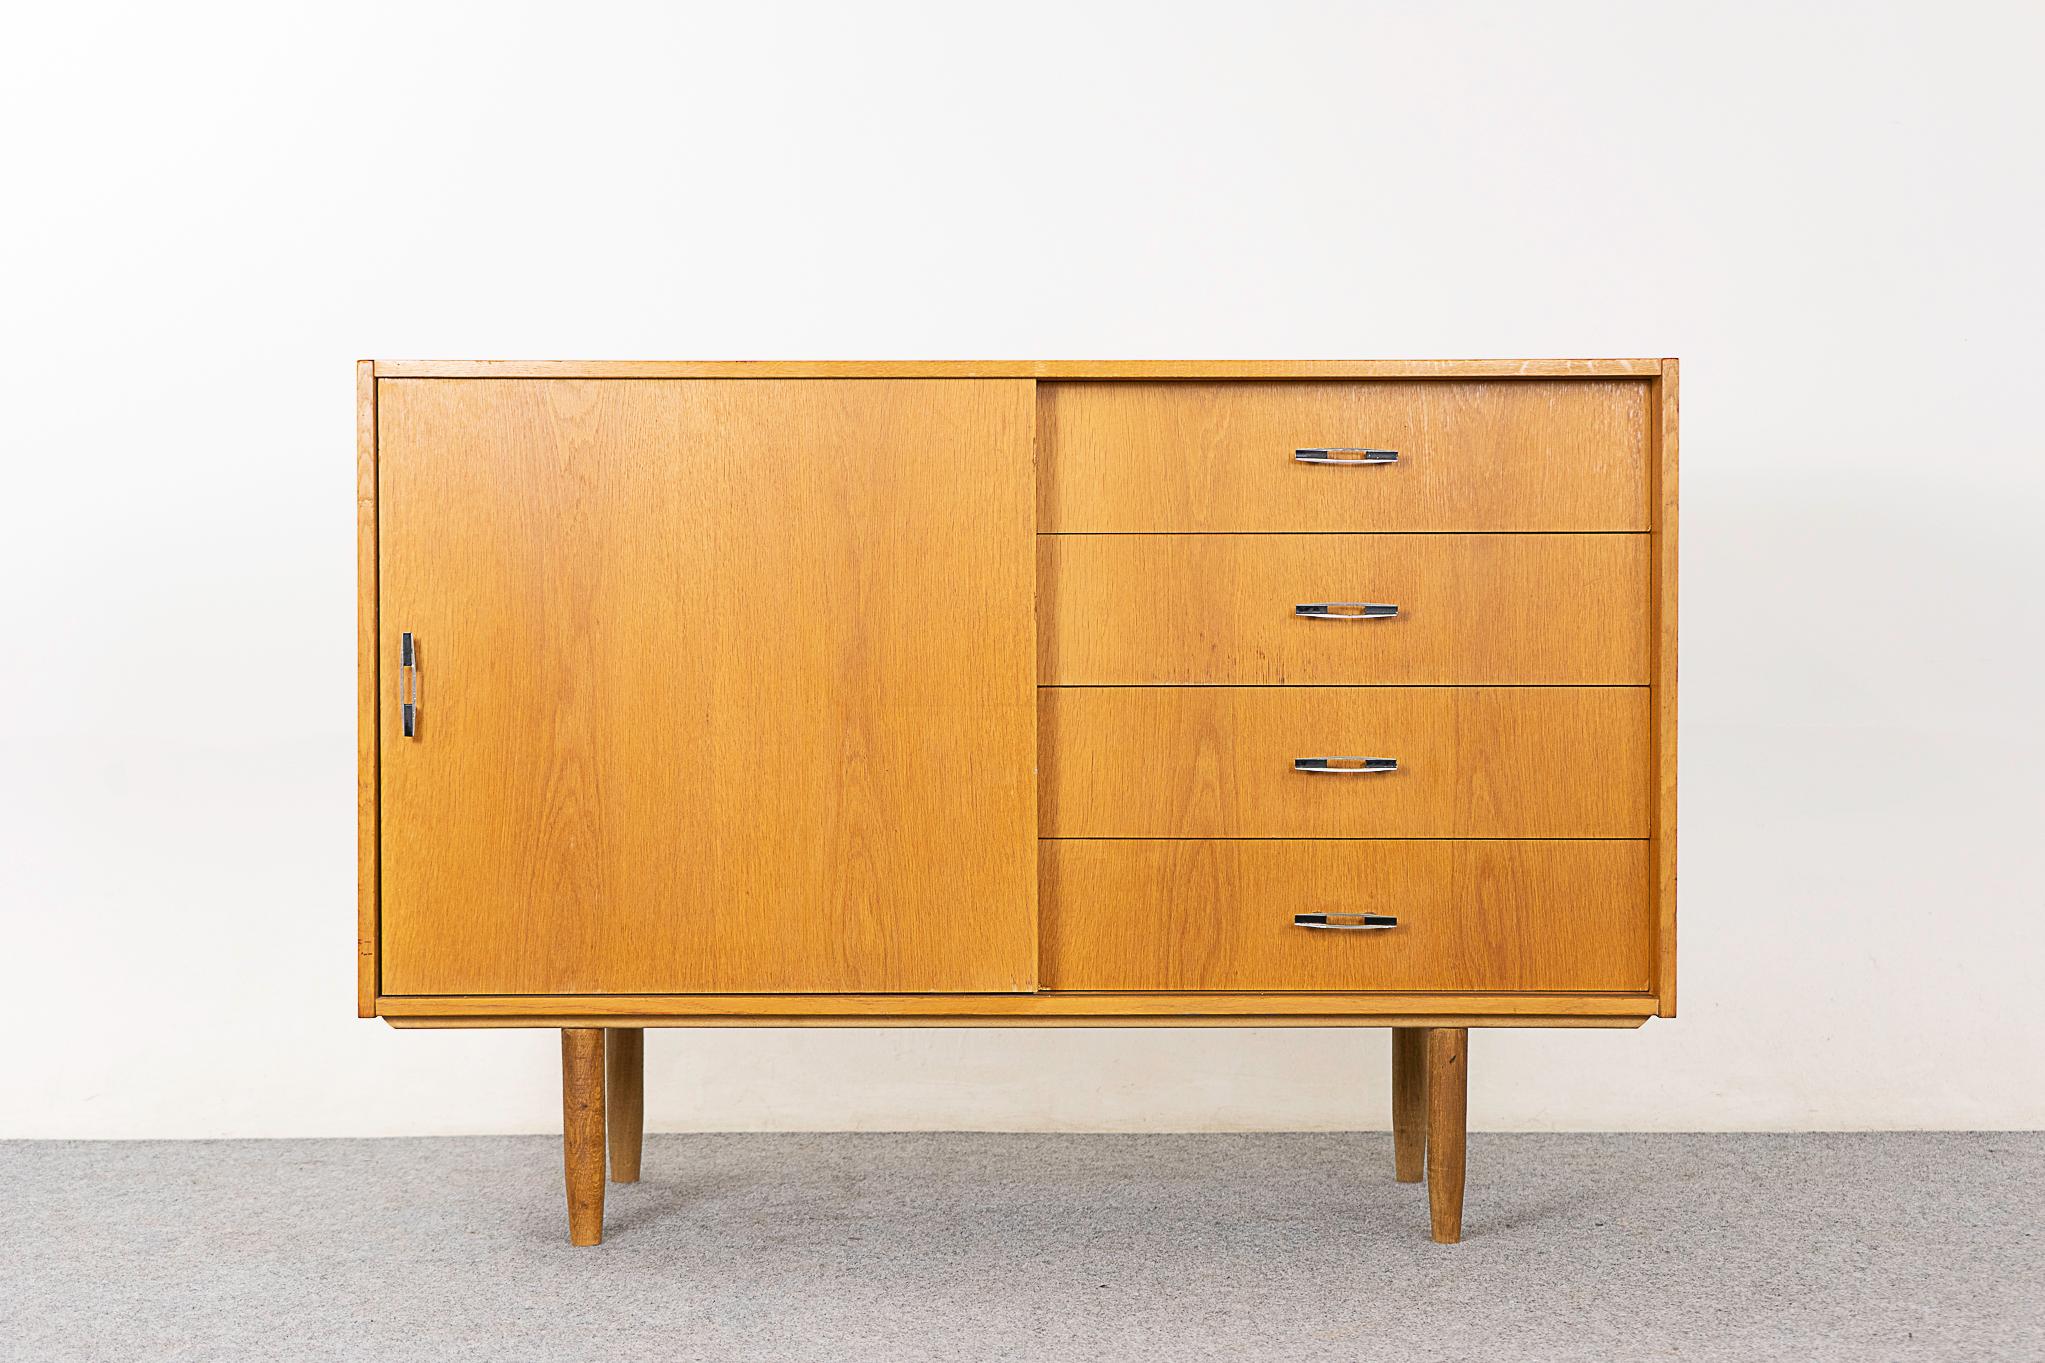 Oak Danish cabinet, circa 1960's. Book-matched veneer top and drawer faces, a handy combination of drawers and a removable interior shelf. Sleek metal handles and tapered legs.

Please inquire for remote and international shipping rates.